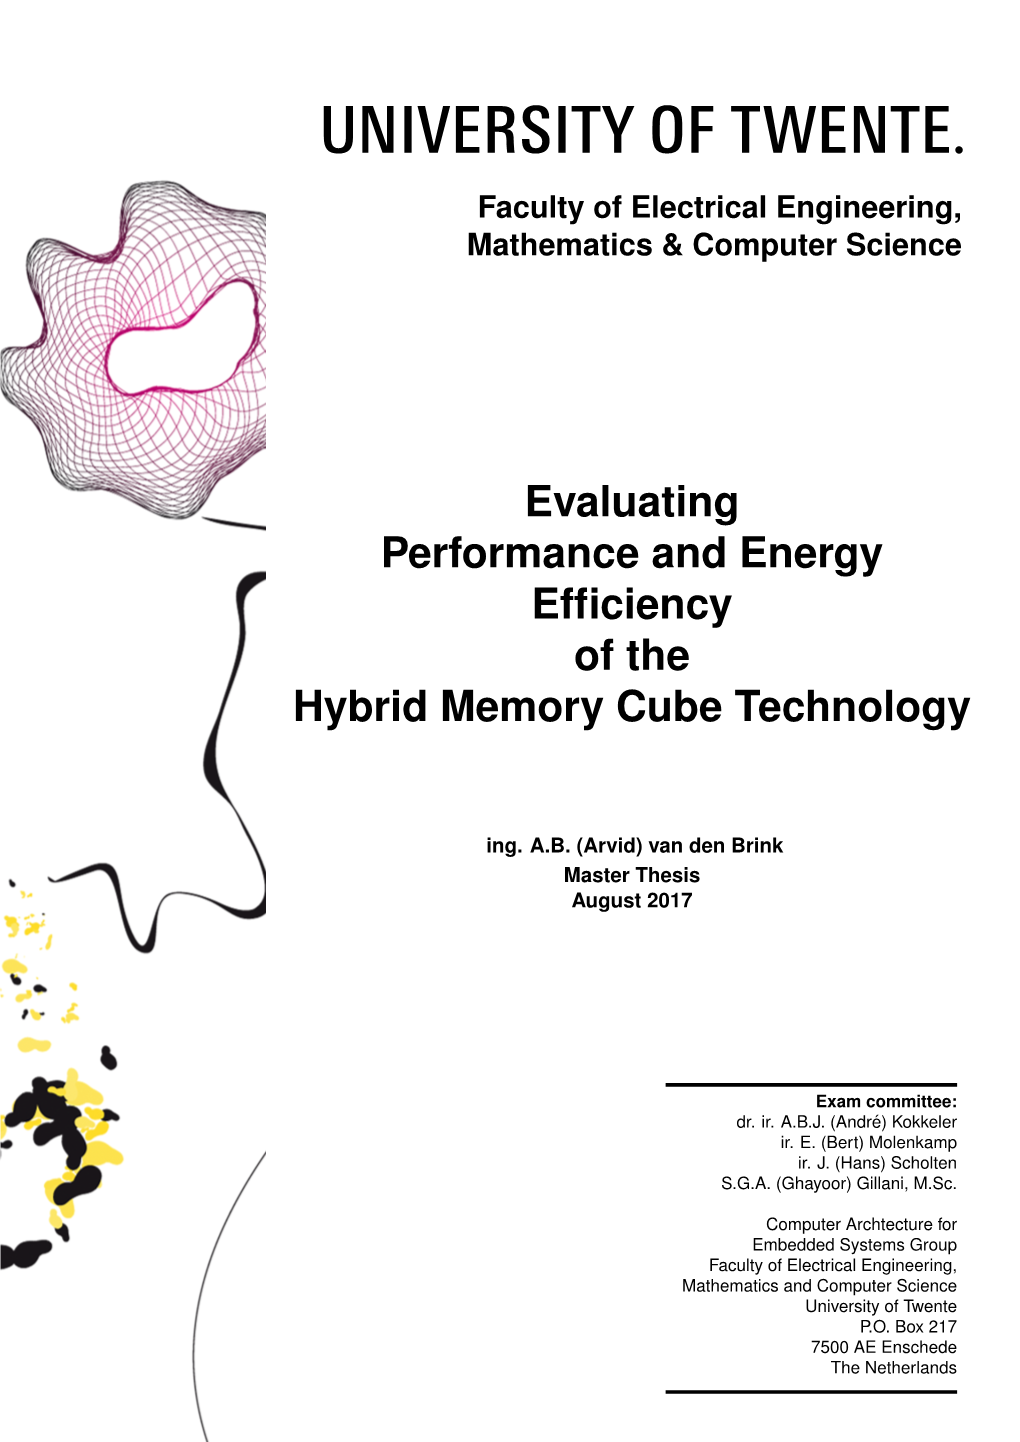 Evaluating Energy Efficiency of the Hybrid Memory Cube Technology